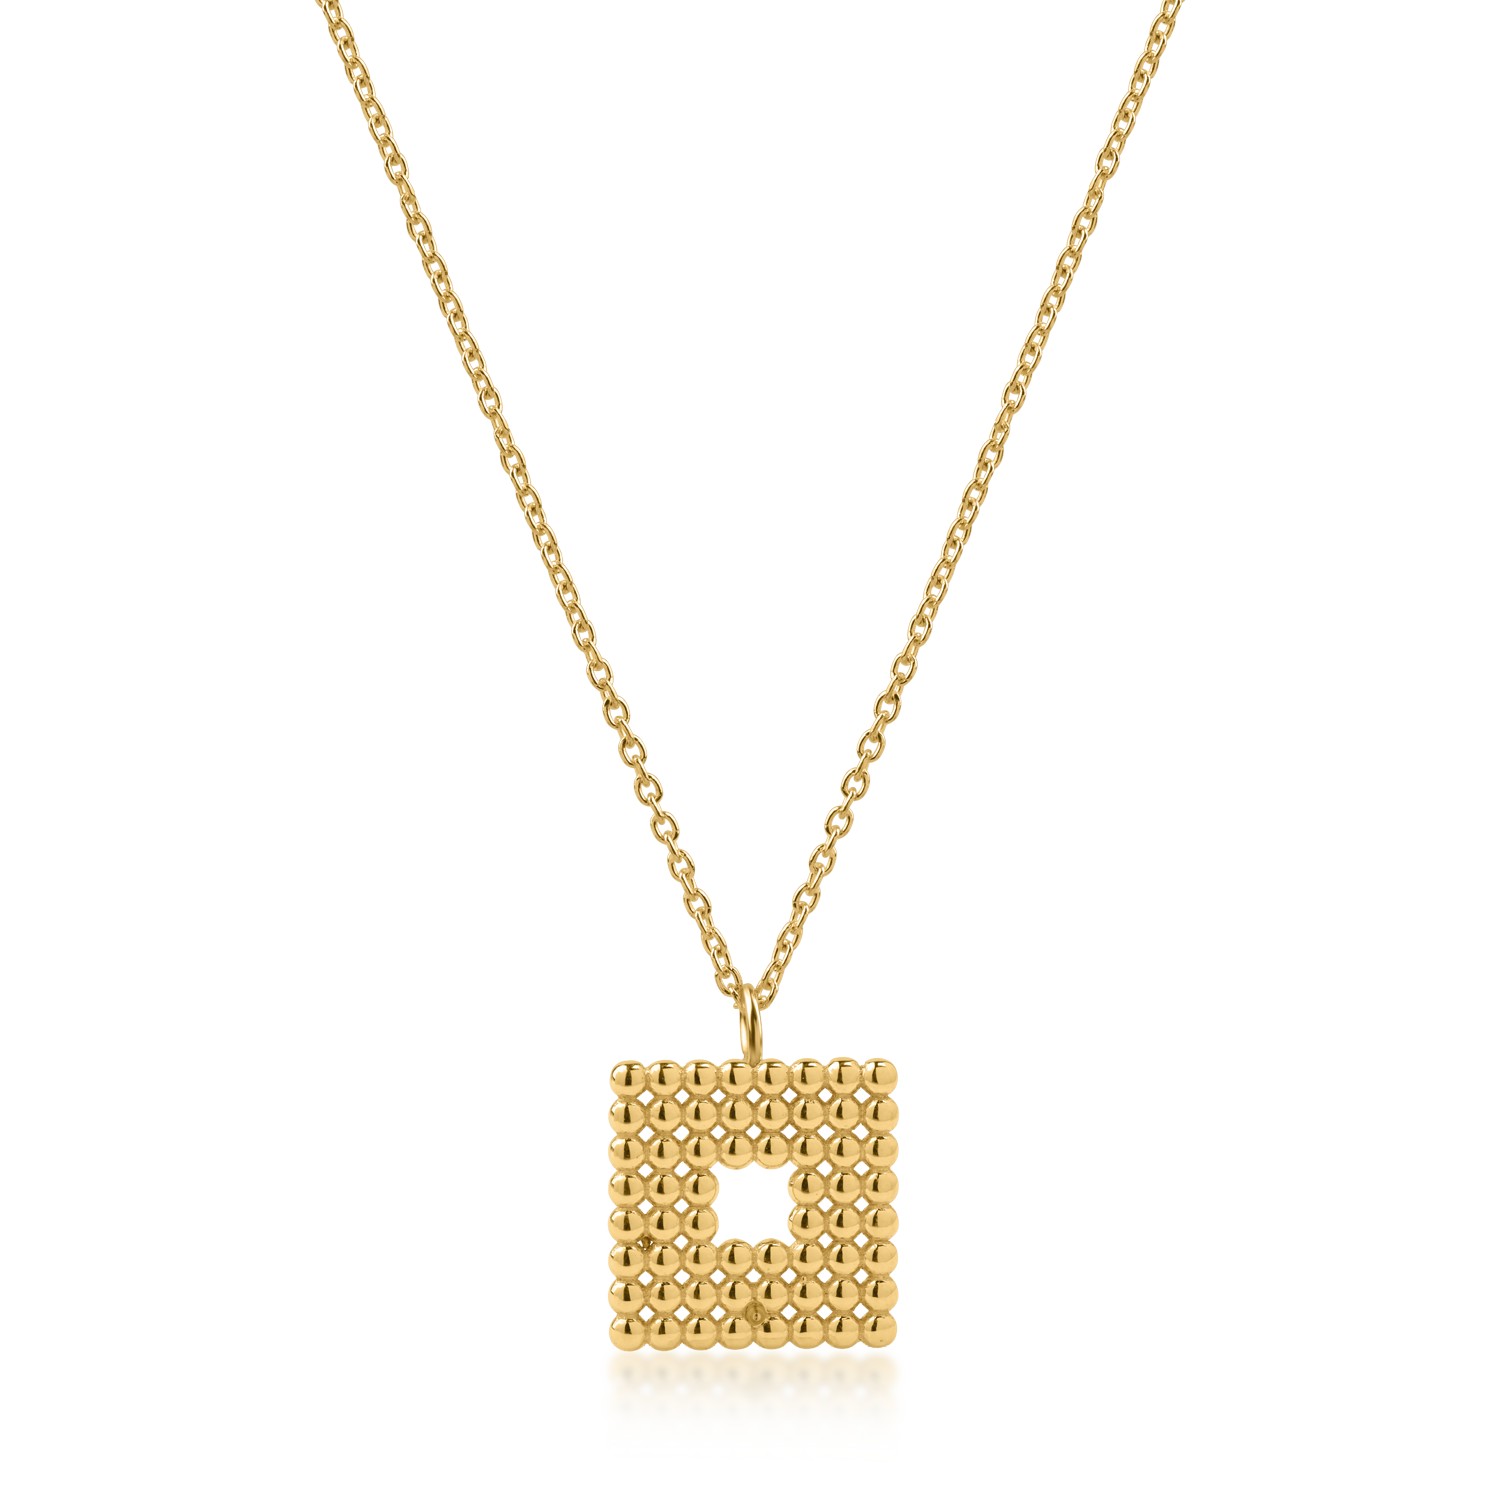 Yellow gold chain with square pendant